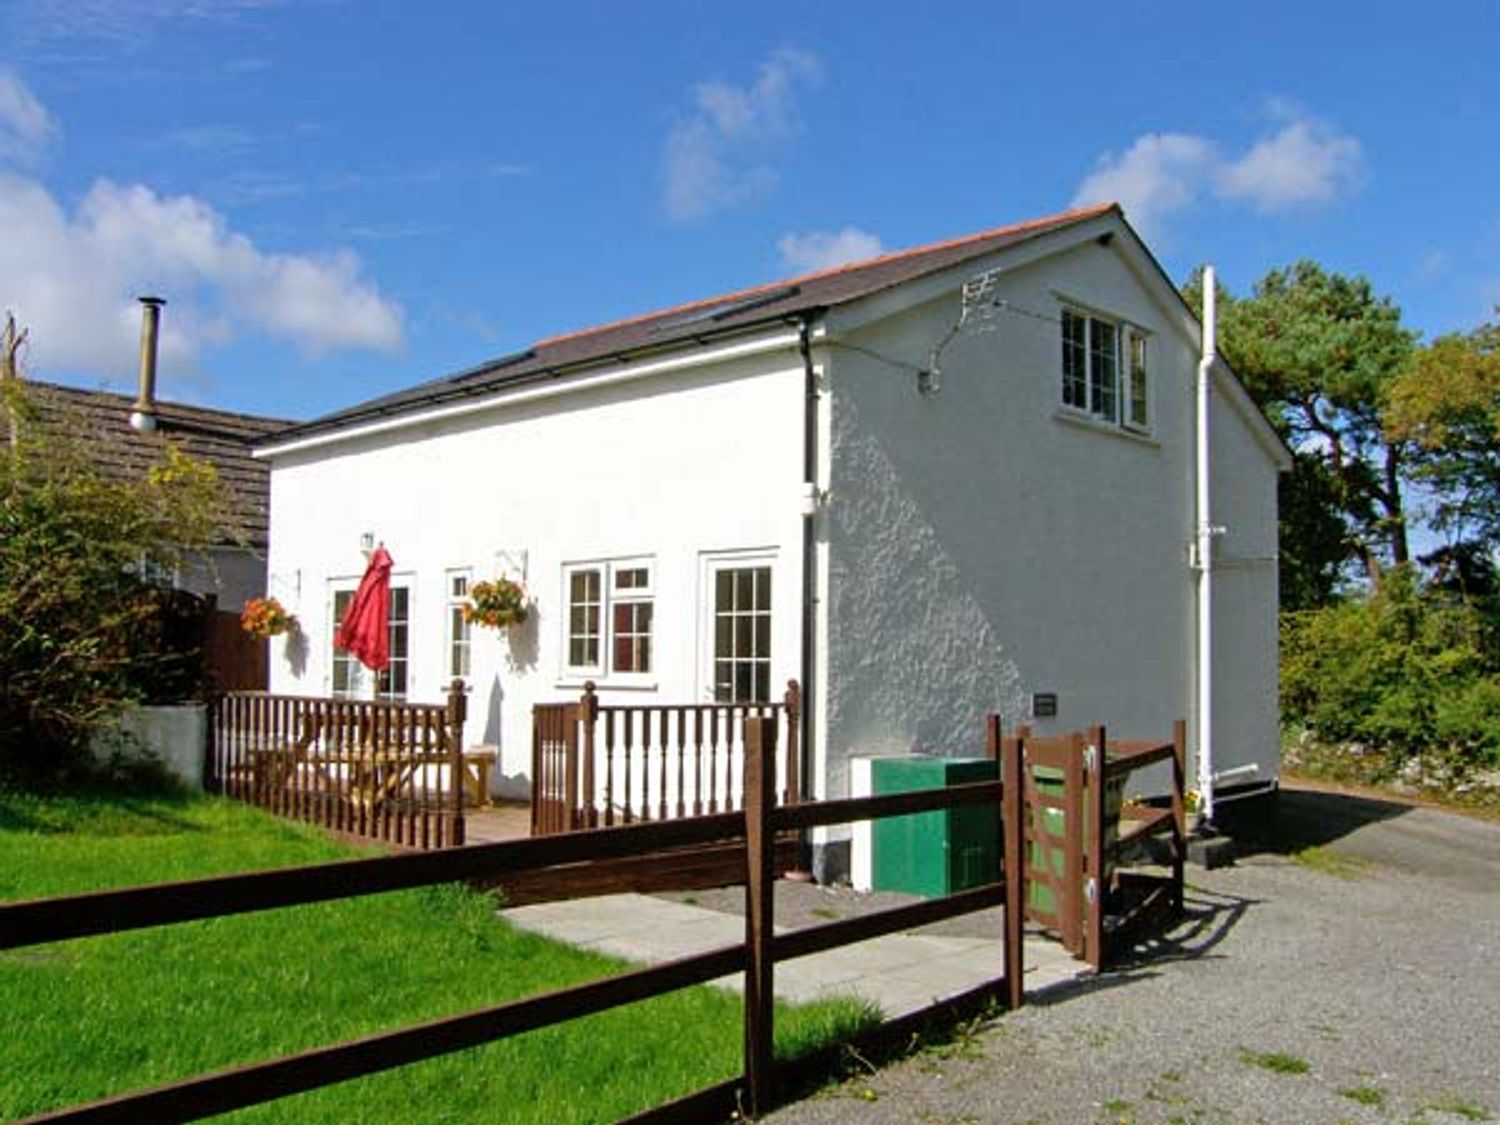 Farmhouse Cottage - Anglesey - 9873 - photo 1